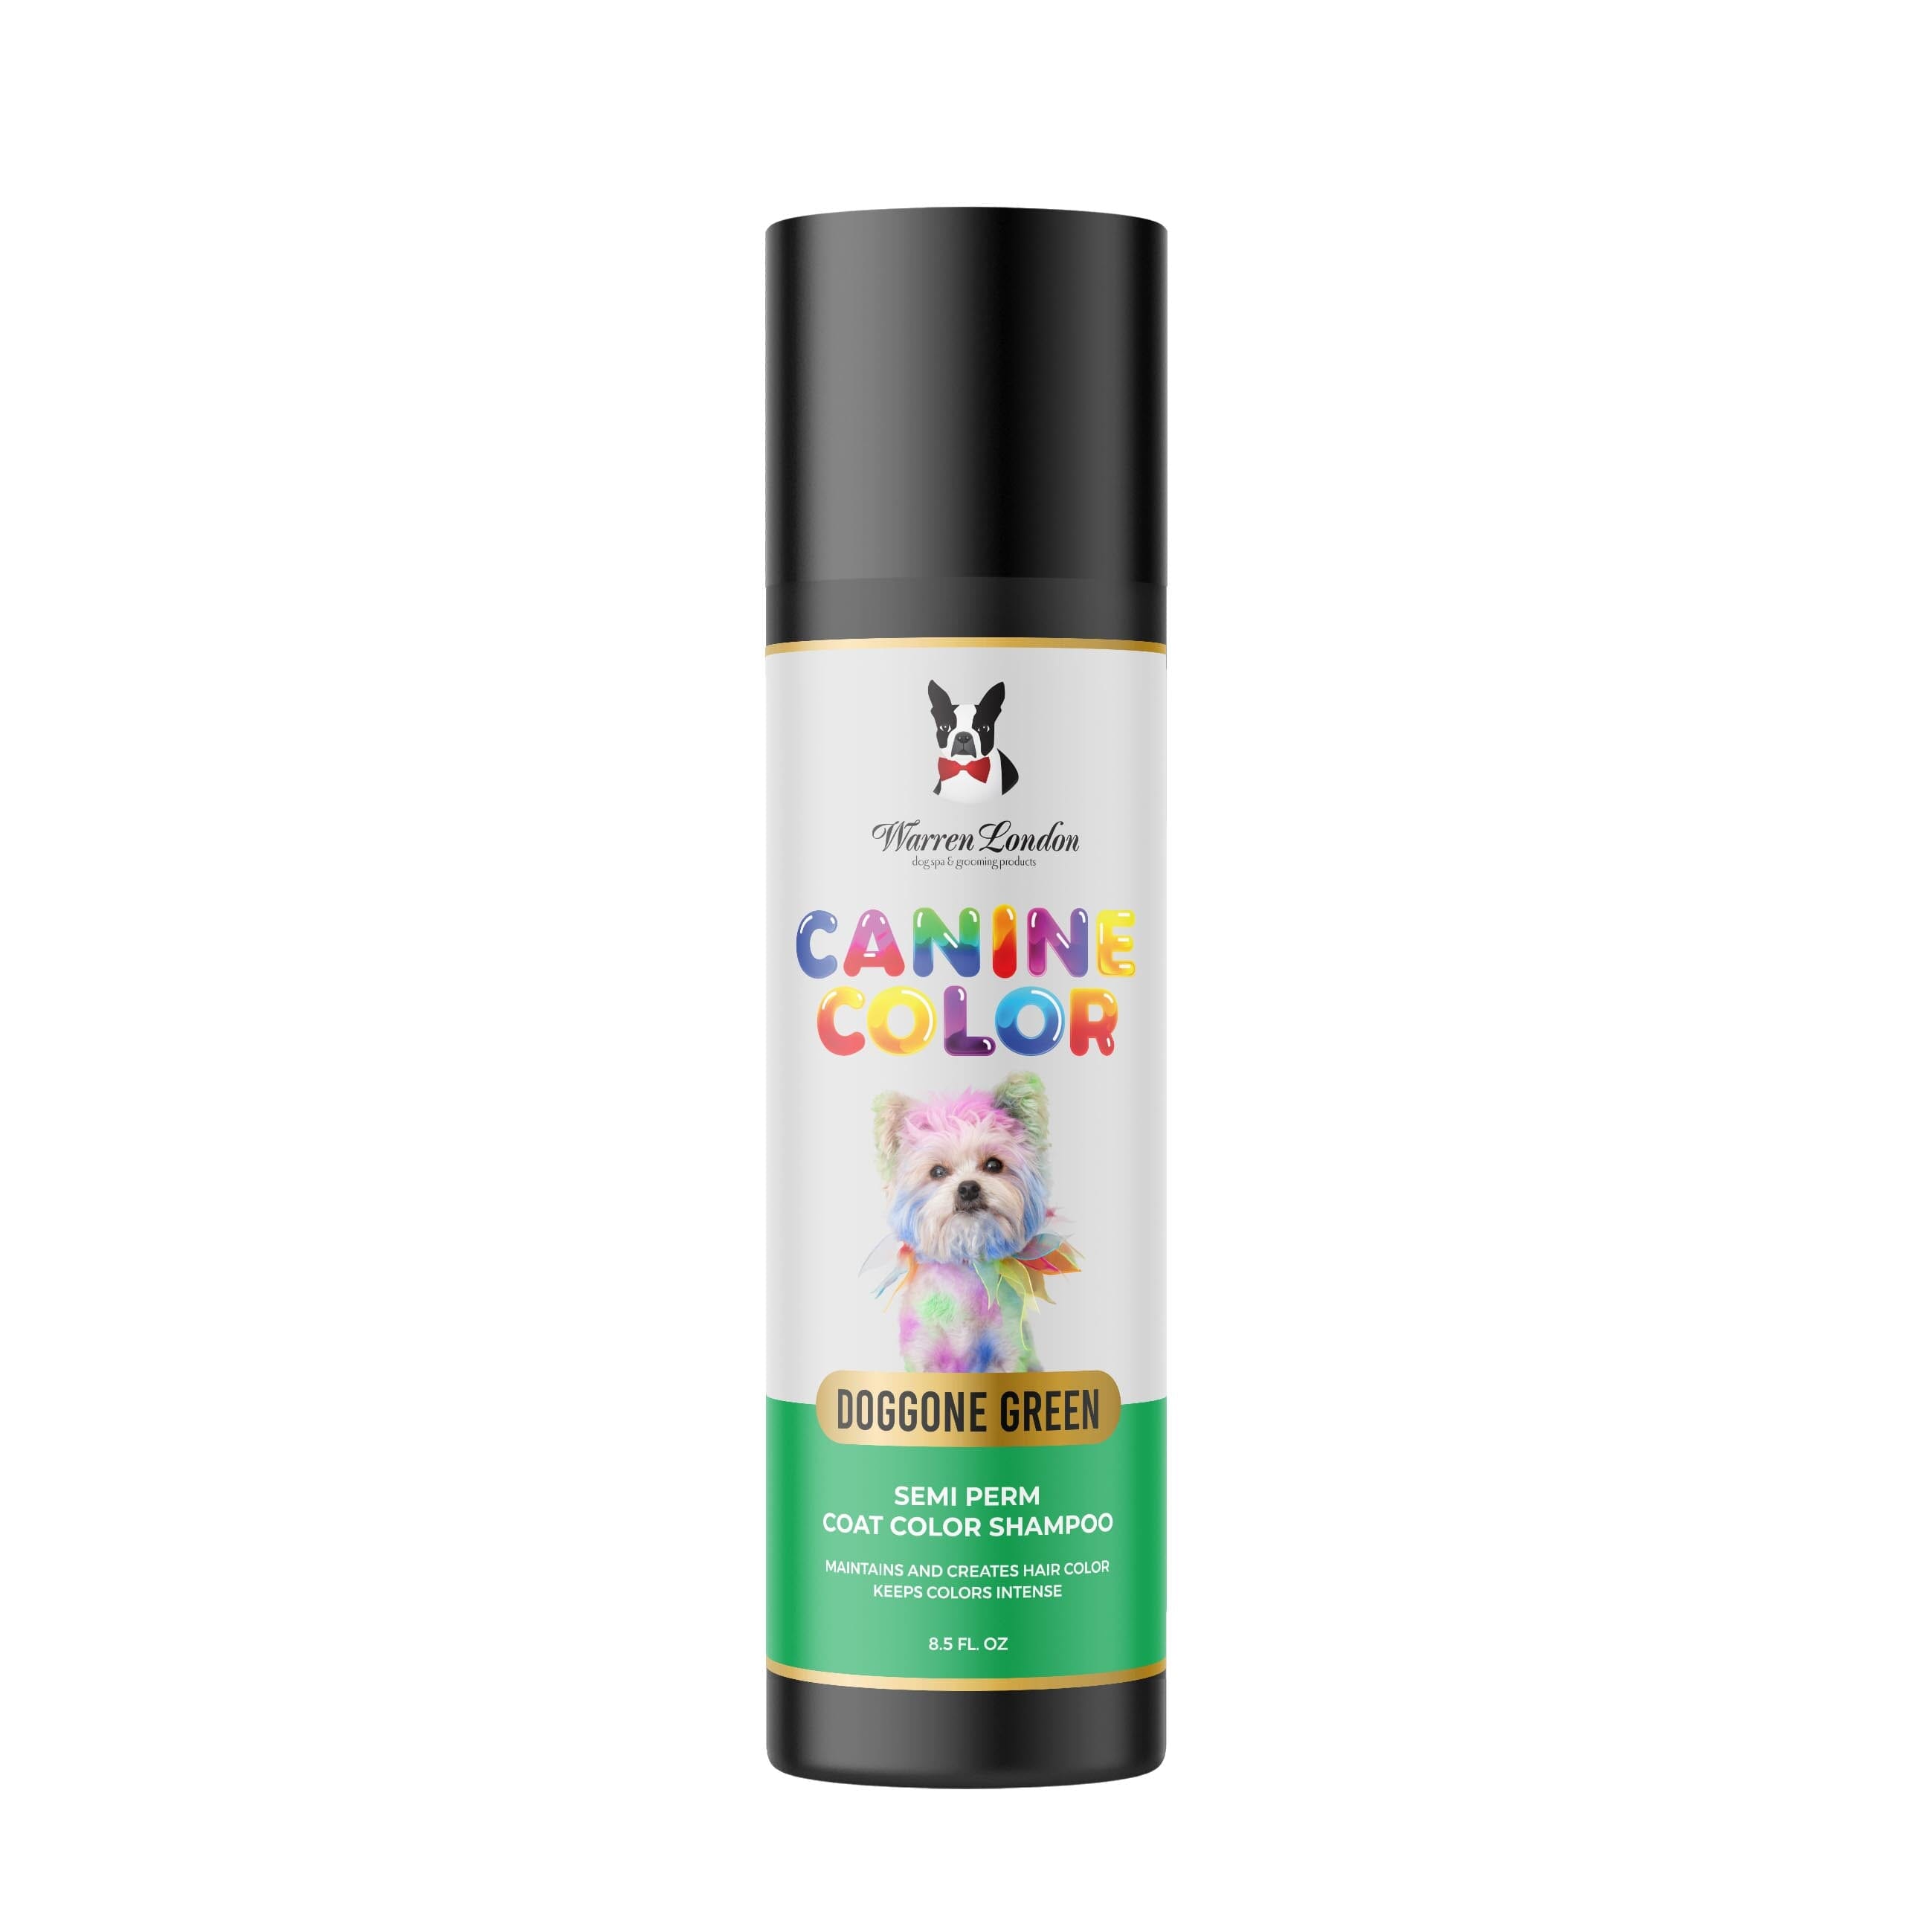 Canine Color Semi Perm Coat Color Shampoo for Dogs Spa Product Warren London Green 